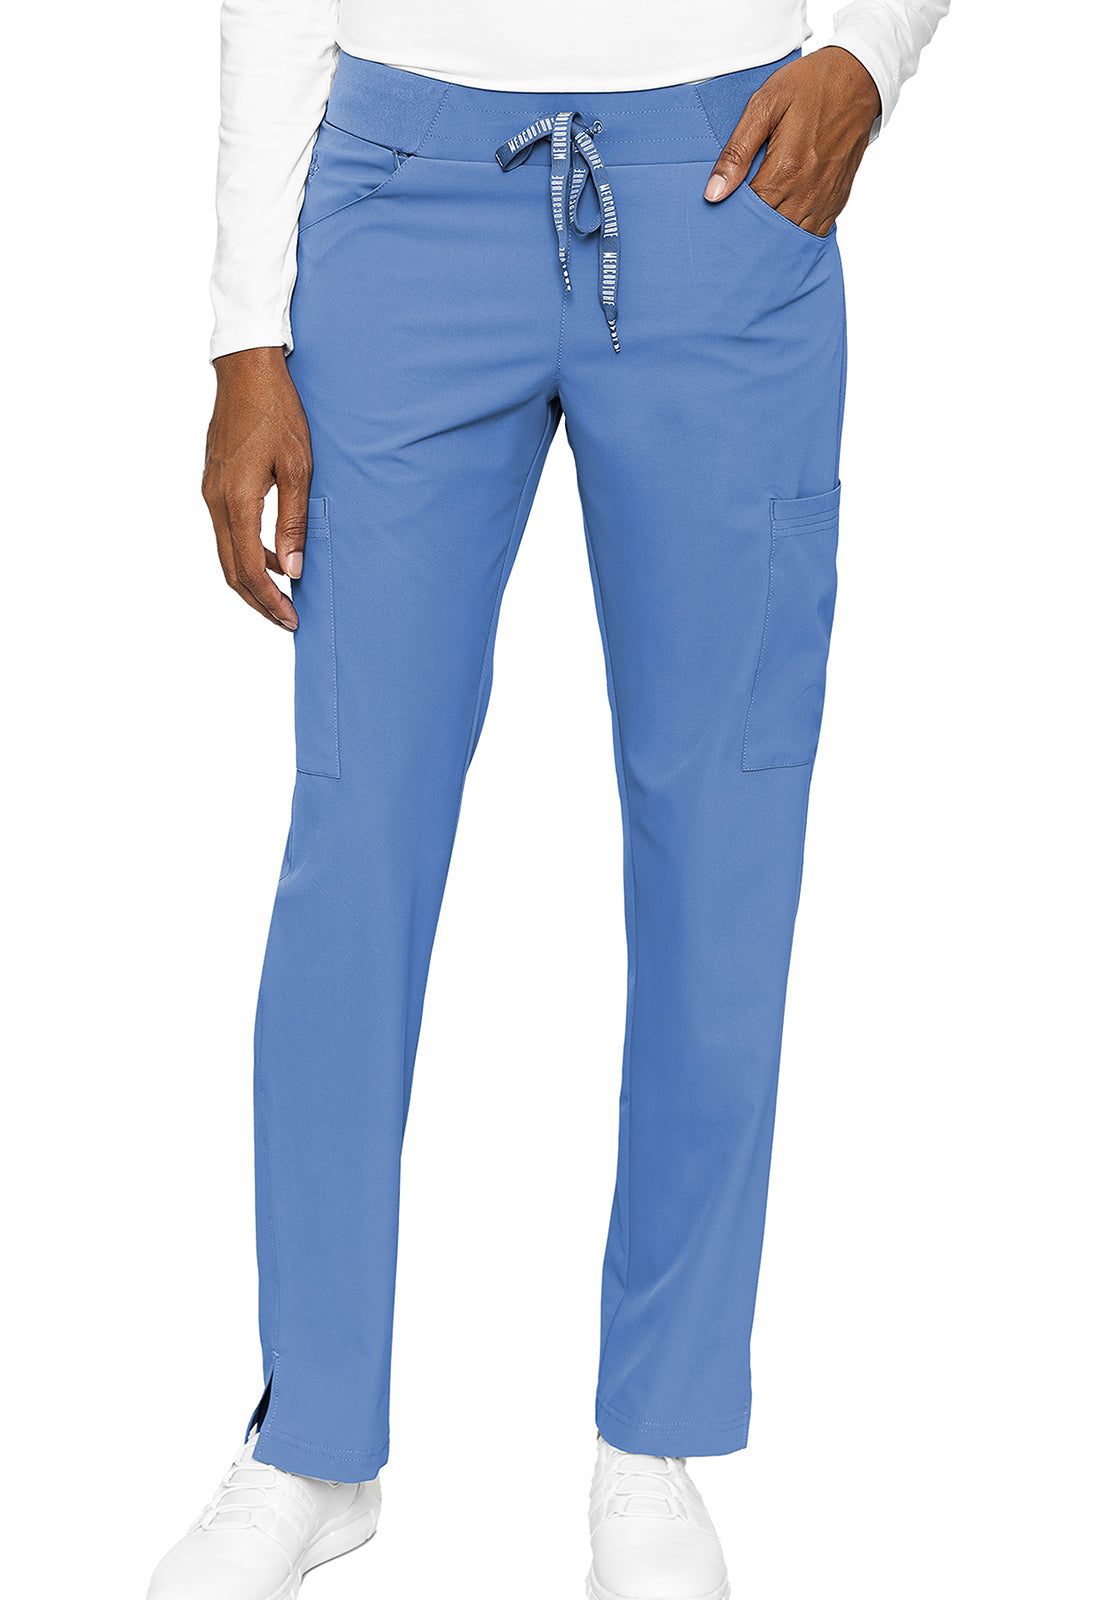 Clearance Med Couture Peaches Tall Scoop Pocket Pants